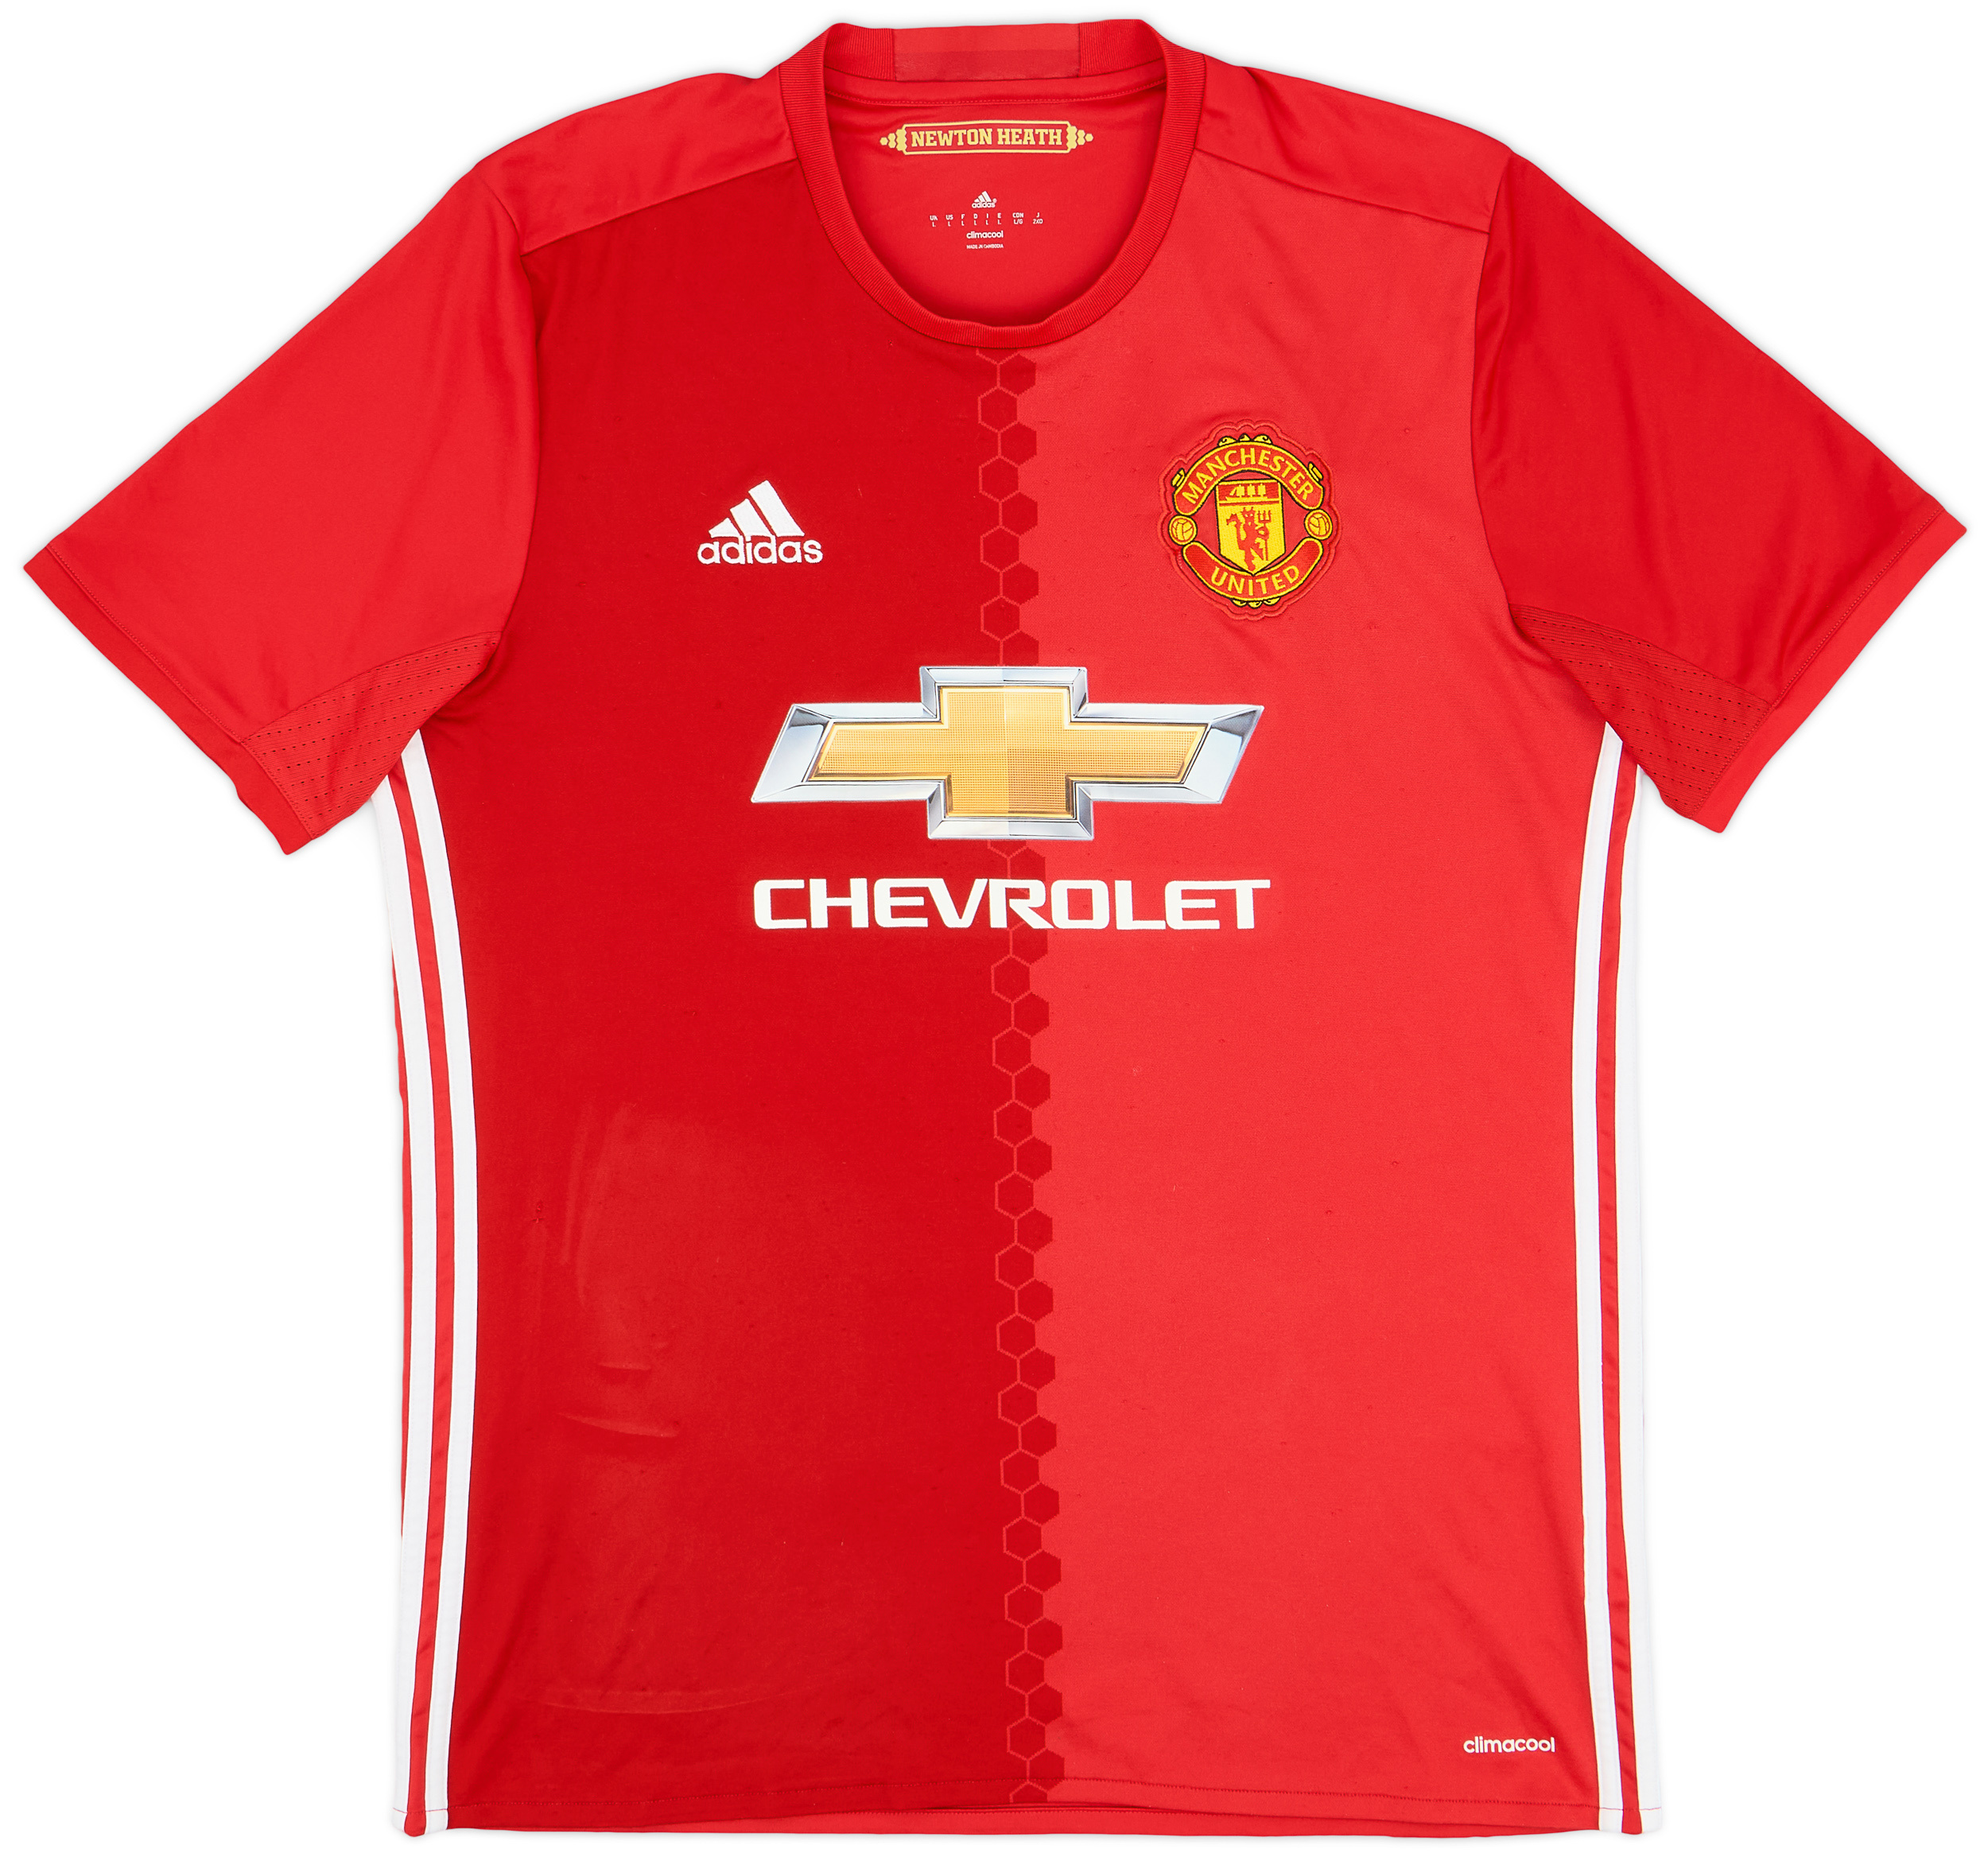 2016-17 Manchester United Home Shirt - 6/10 - ()